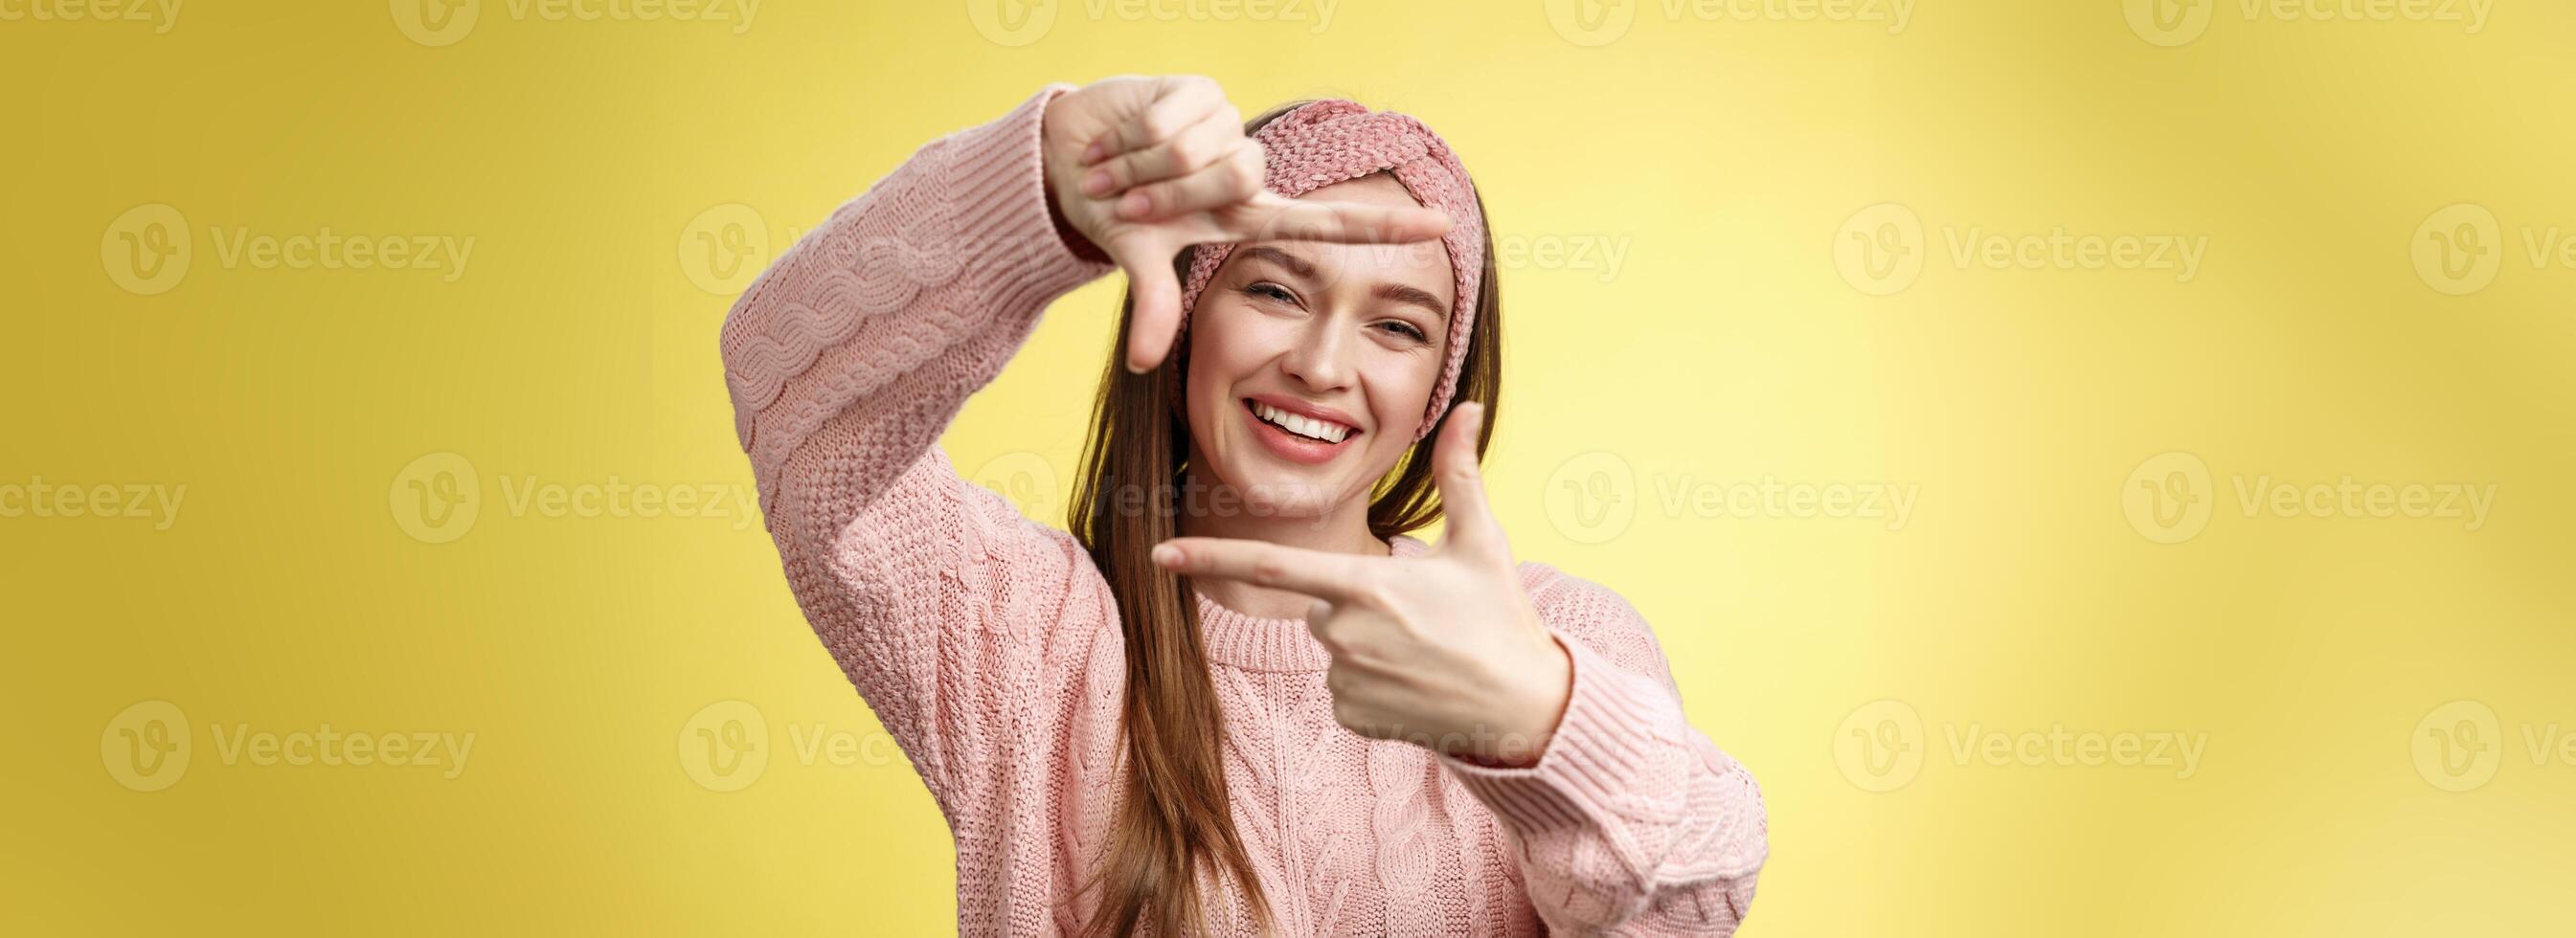 Charming outgoing, happy girl smiling cheerful, making frame of fingers looking through it excited and joyful, grinning, planning future, picturing how put furniture, posing cute over yellow wall photo